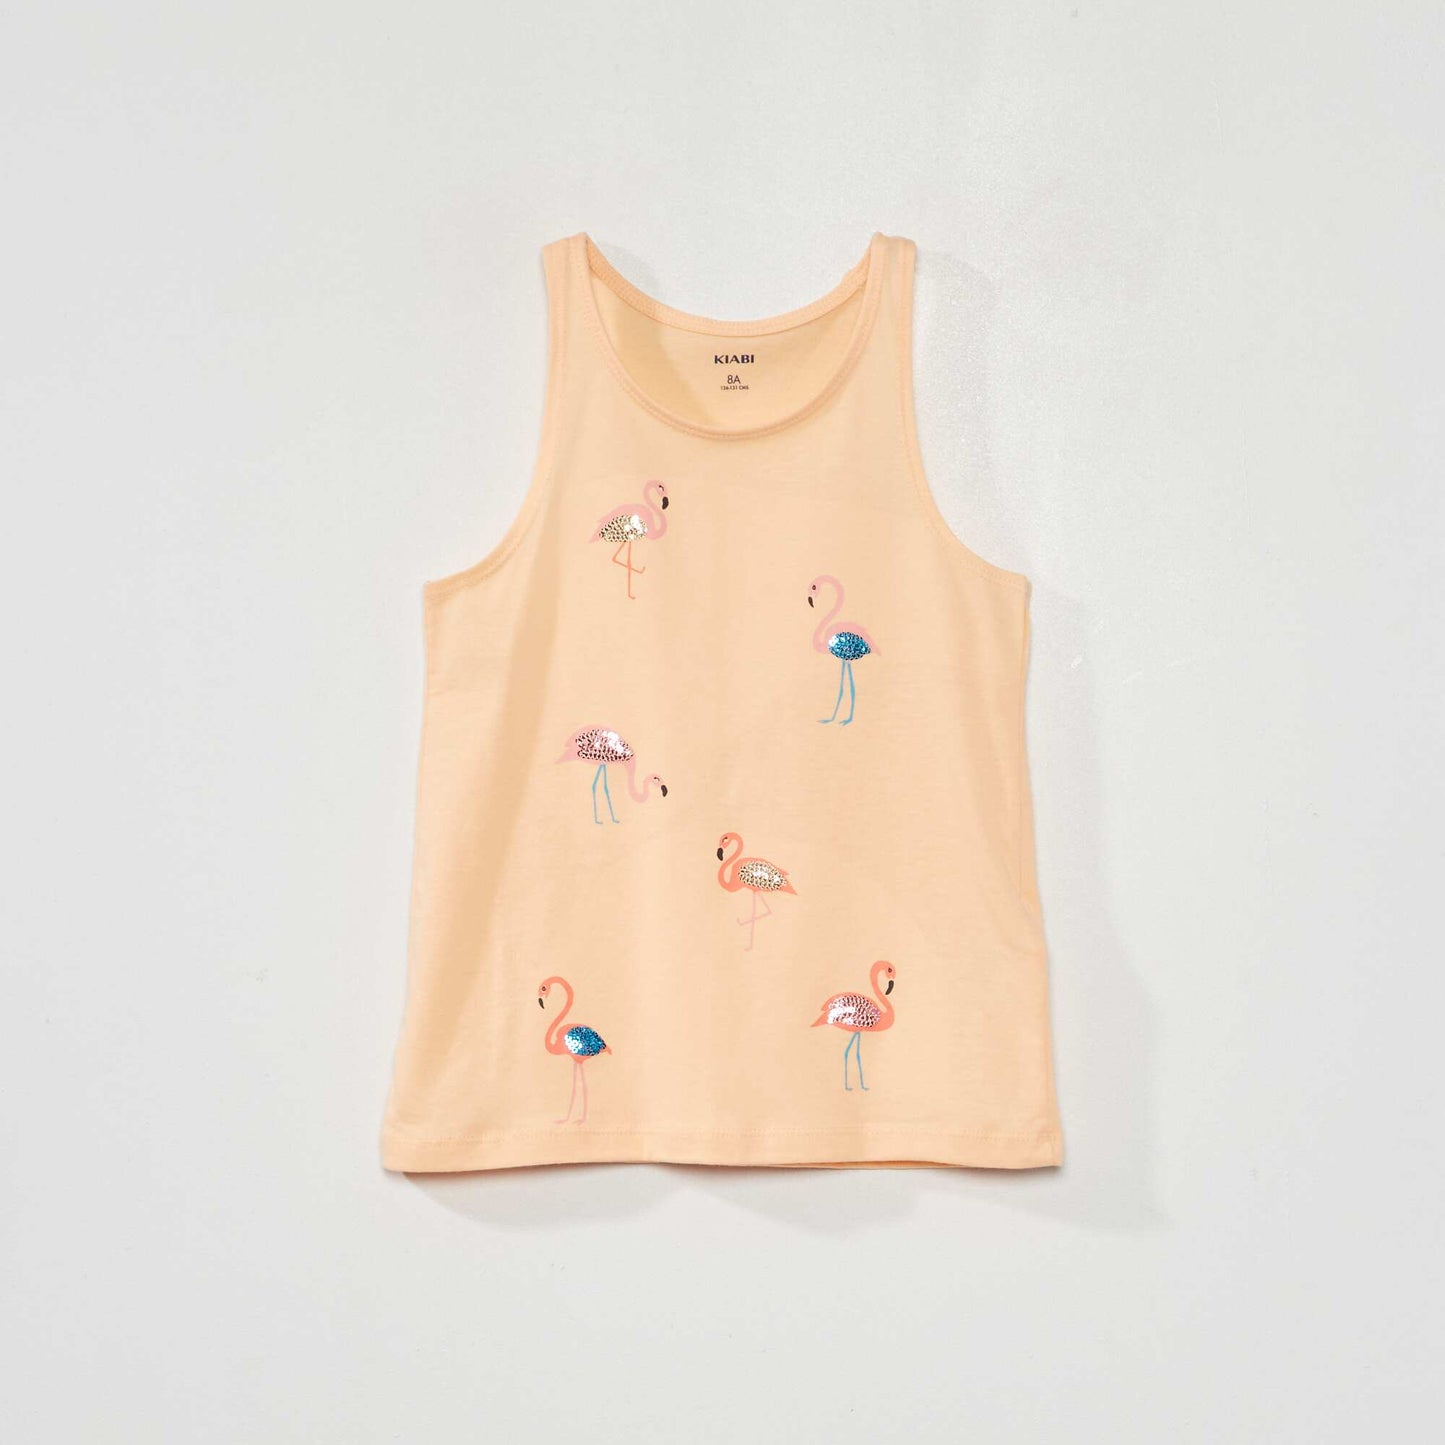 Jersey vest top with cute patterns ORANGE